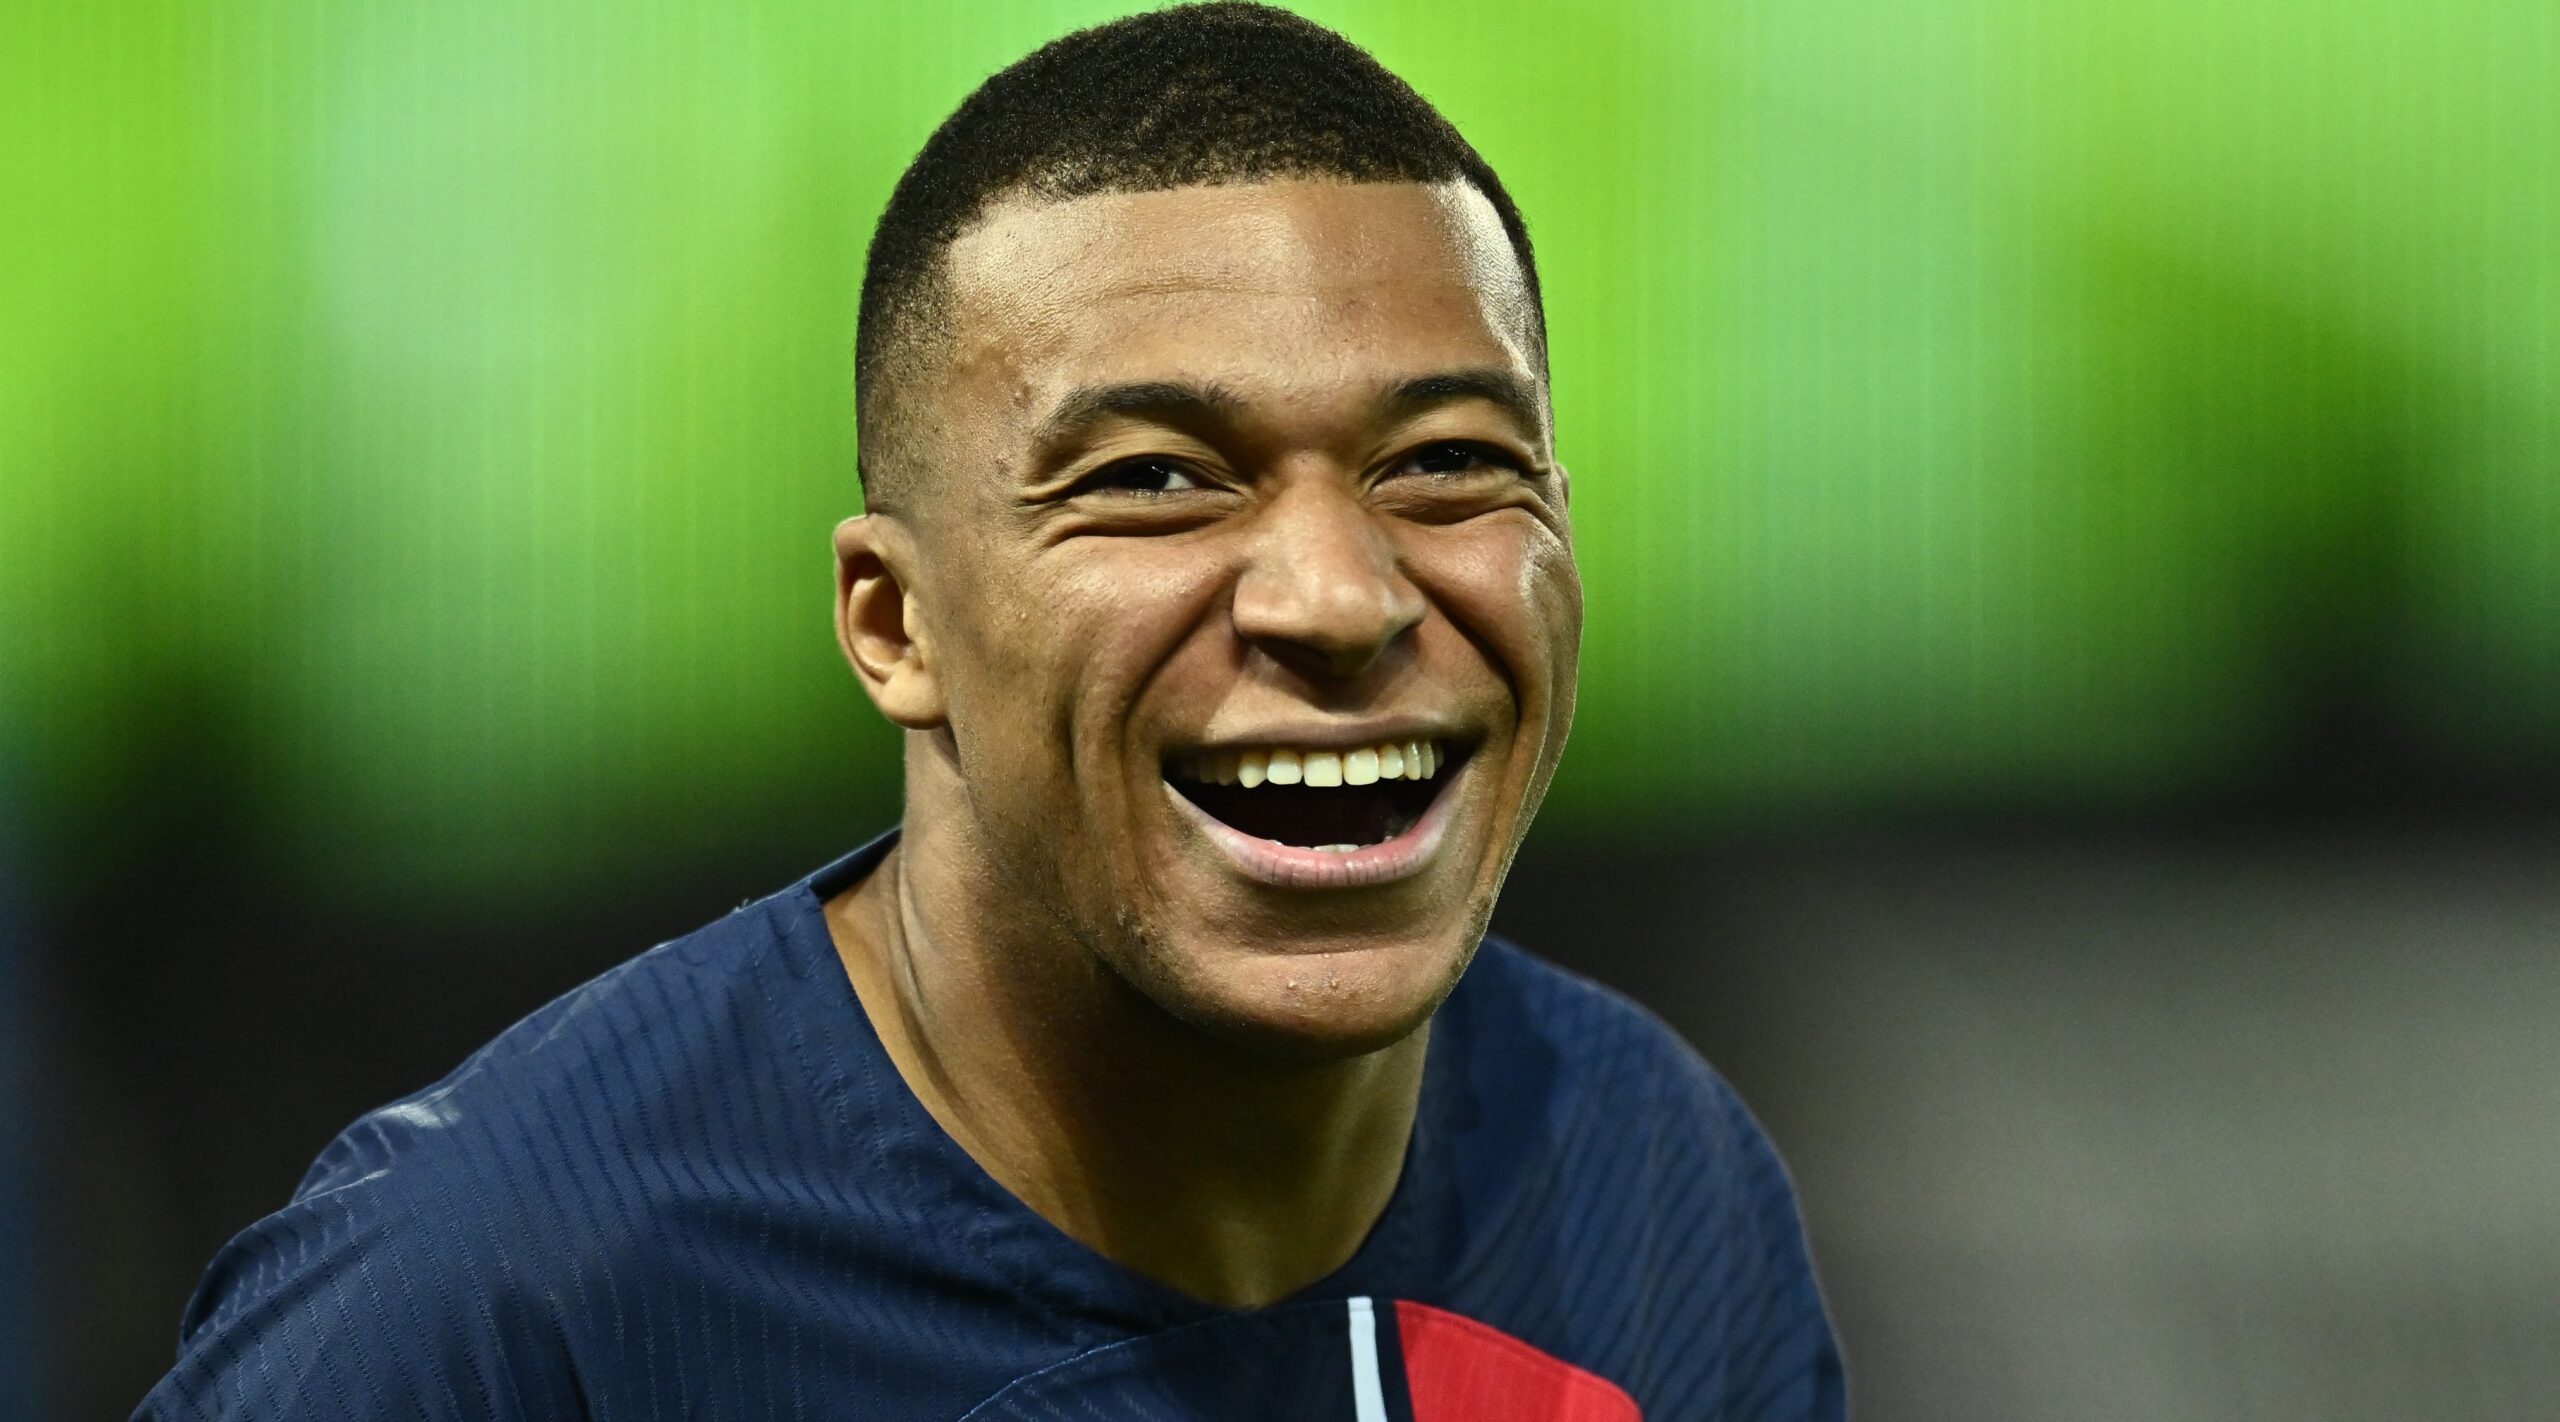 Ouctast Kylian Mbappe 'reinstated' by PSG as Real Madrid transfer rumours linger